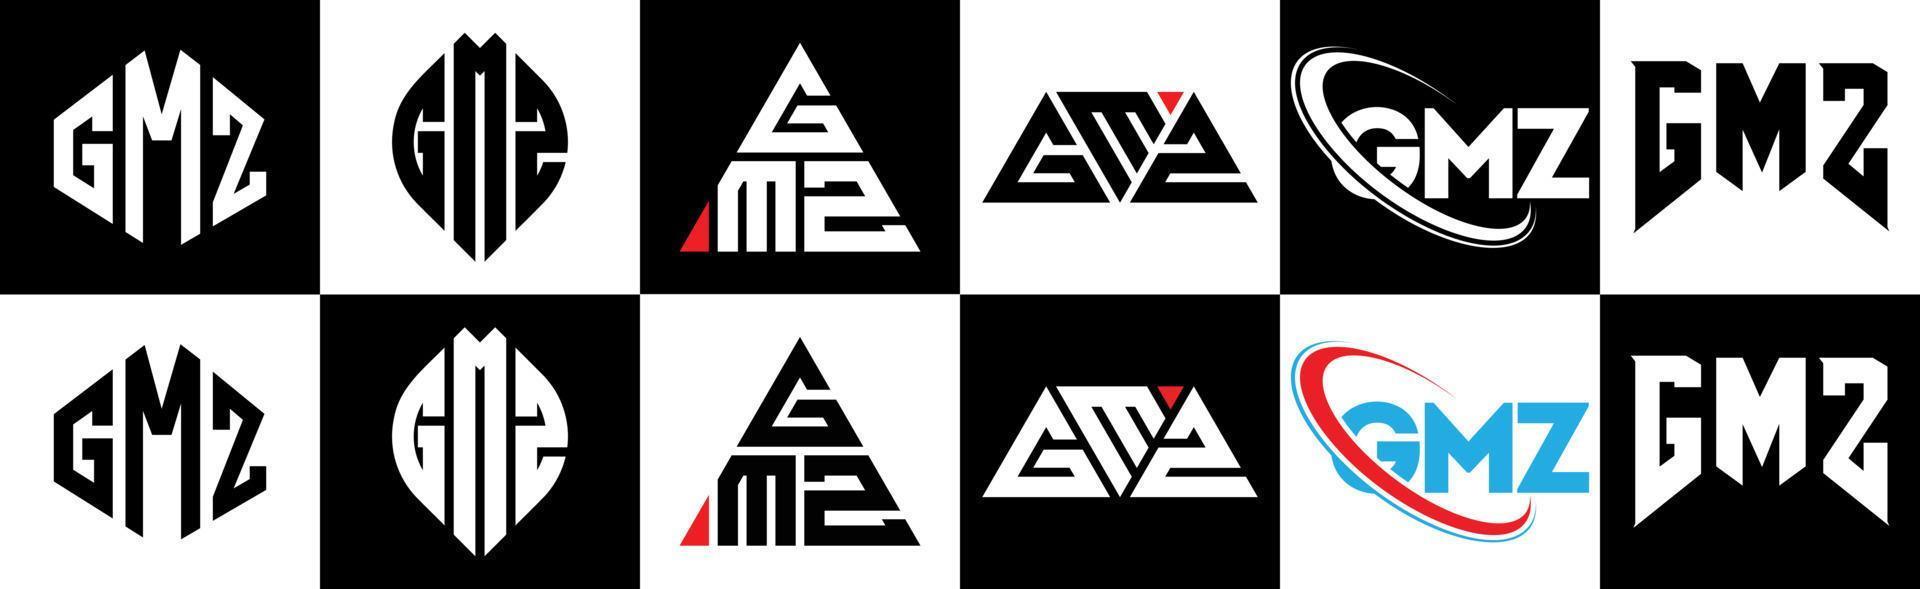 GMZ letter logo design in six style. GMZ polygon, circle, triangle, hexagon, flat and simple style with black and white color variation letter logo set in one artboard. GMZ minimalist and classic logo vector